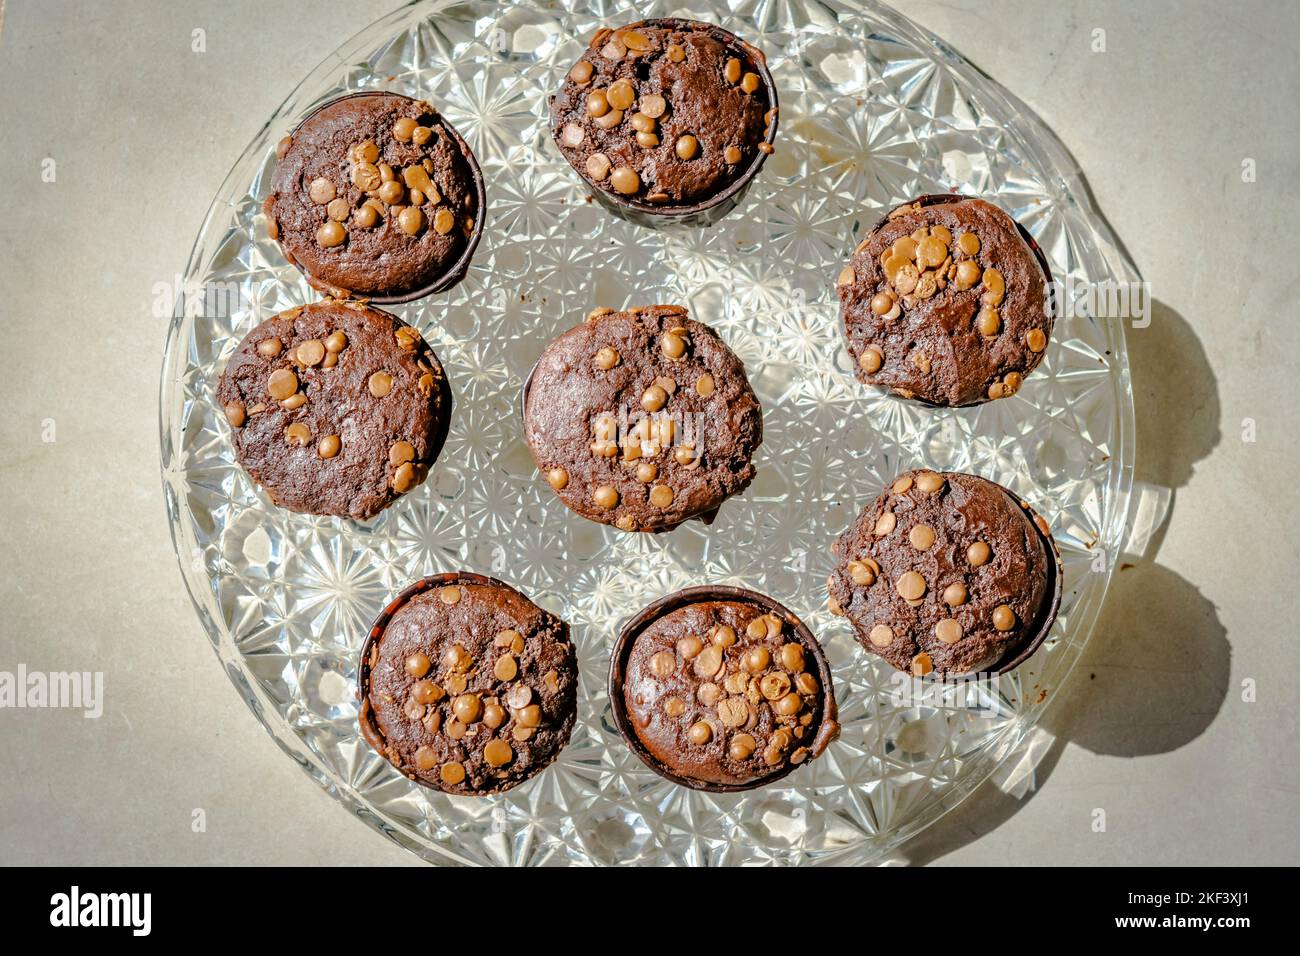 Overhead view of homemade muffins with chocolate chips cakes on a glass plate. Directly above close-up macrophotography with side sunlight shining. Stock Photo